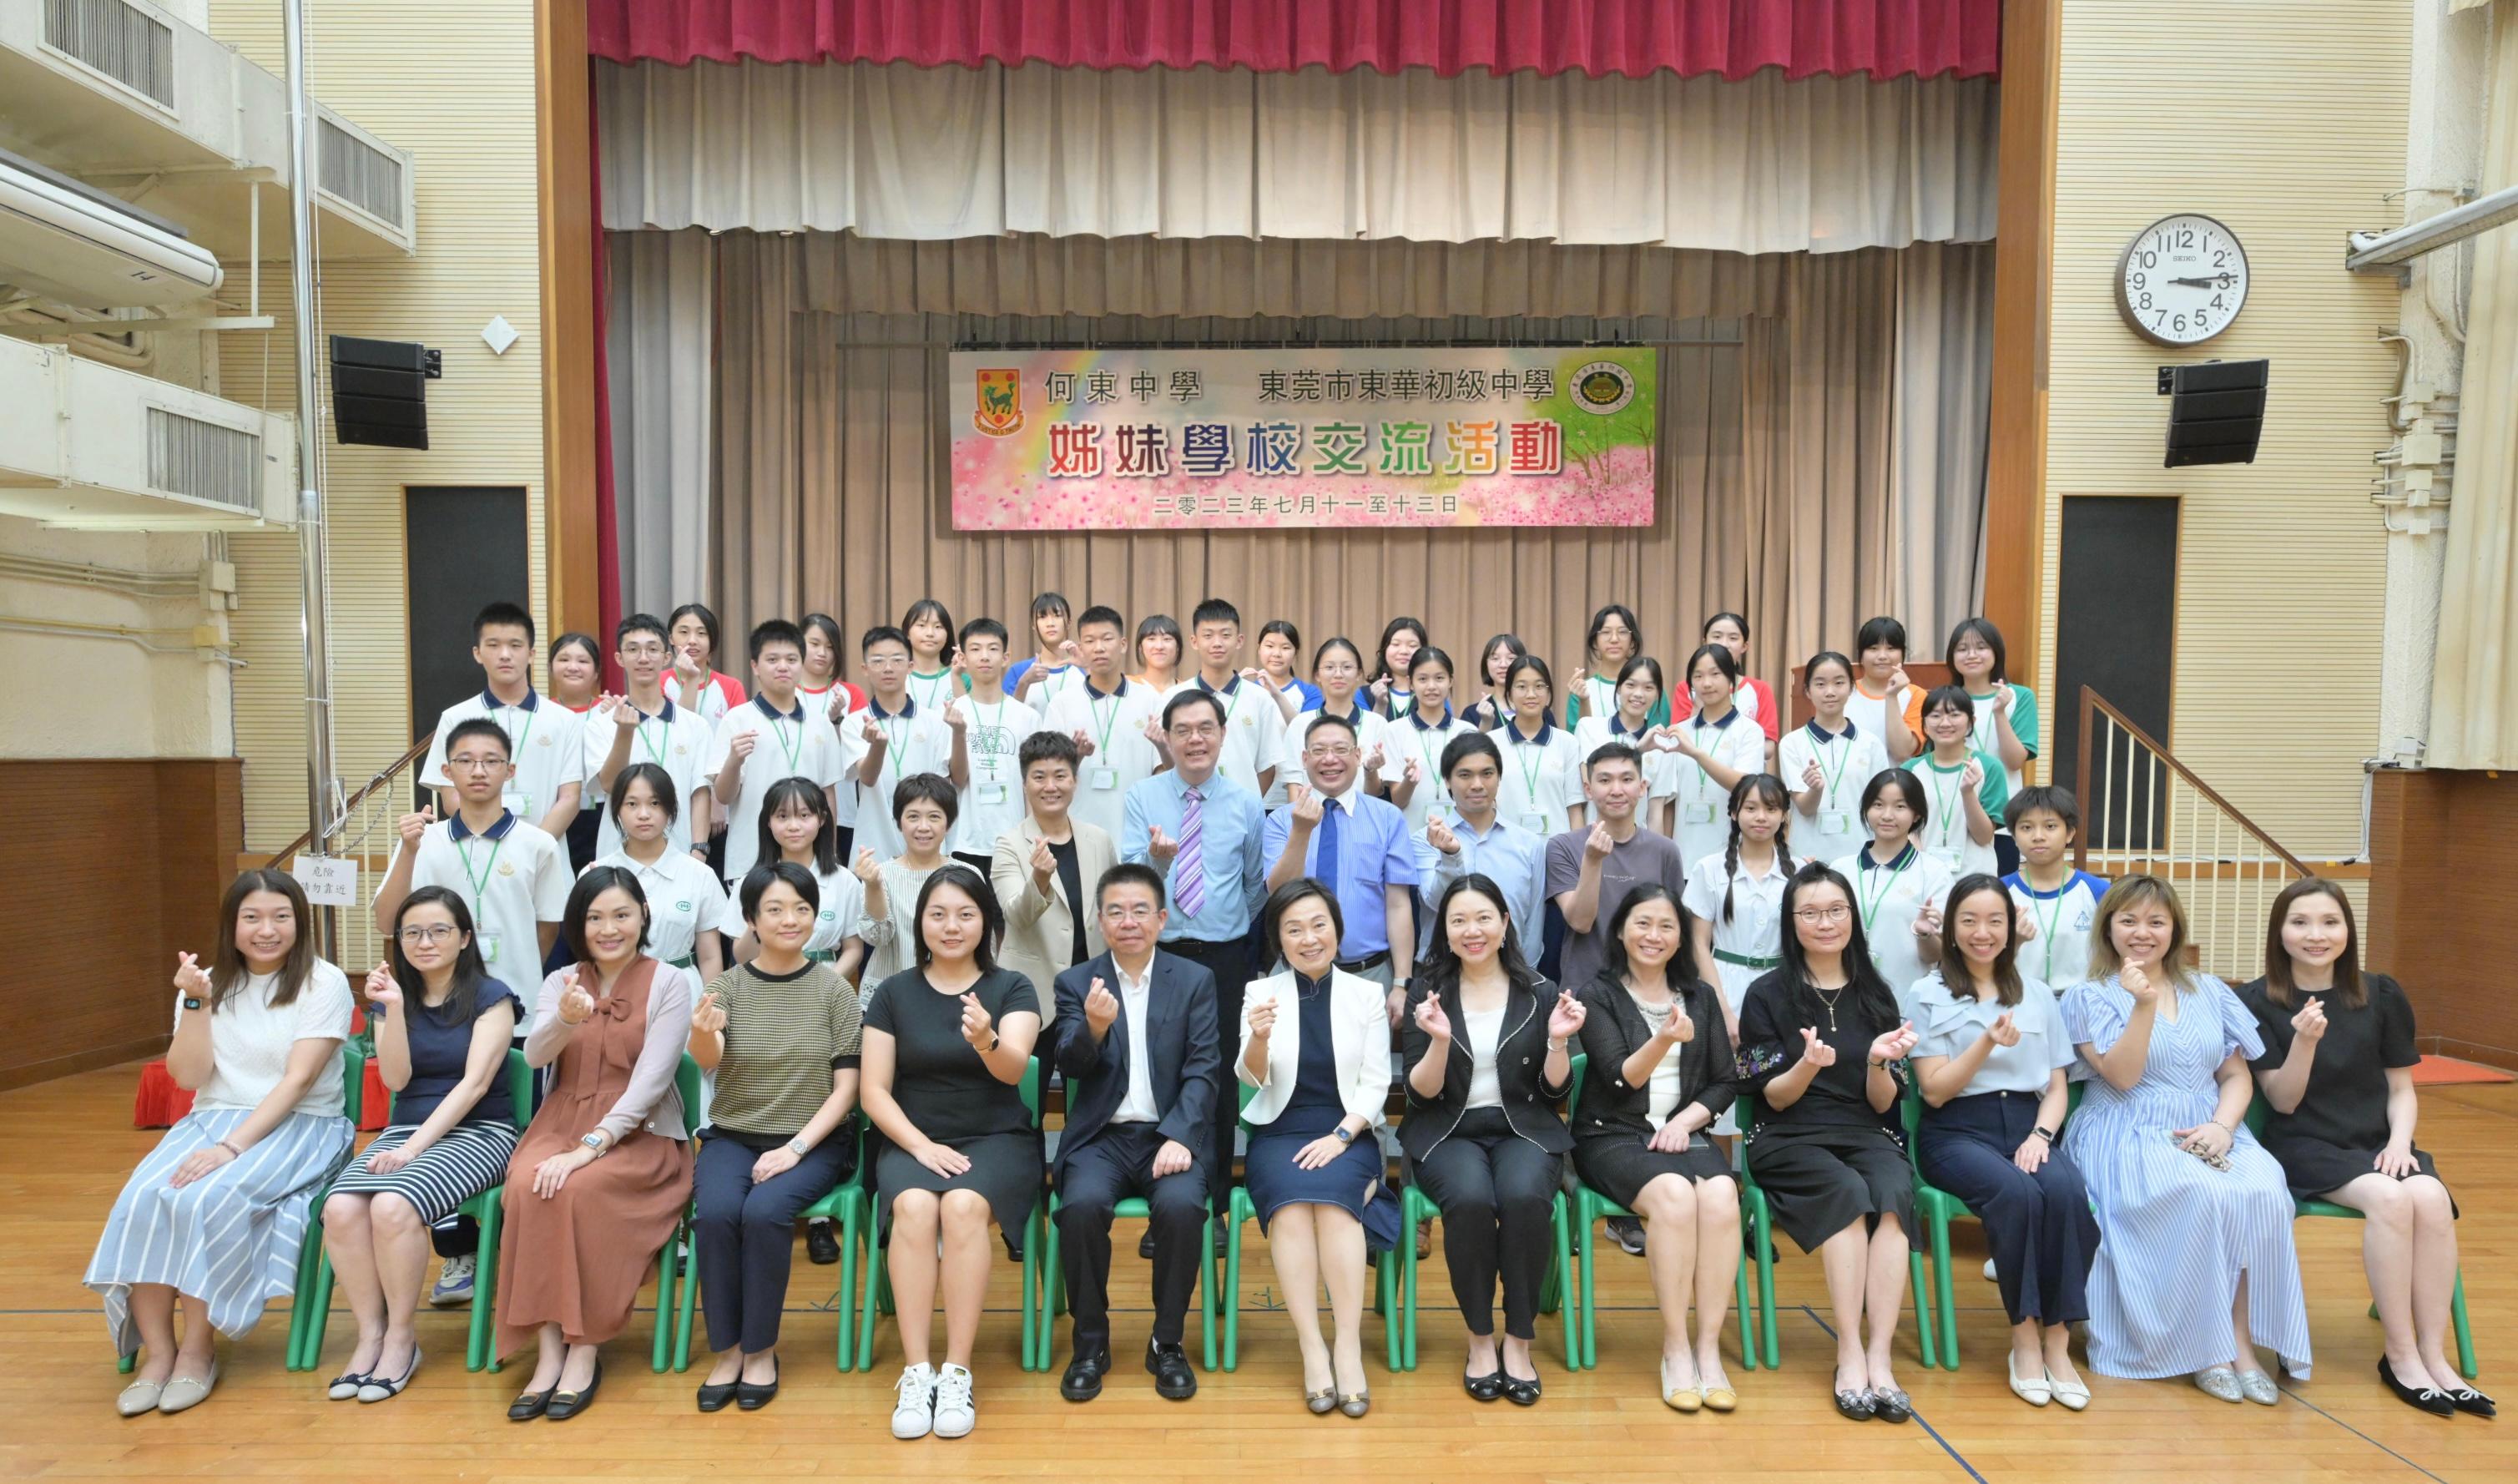 The Secretary for Education, Dr Choi Yuk-lin, visited Hotung Secondary School today (July 11) to attend its sister school exchange activity with Dong Guan Tung Wah Junior High School. Photo shows Dr Choi (front row, middle) with teachers and students of both schools.